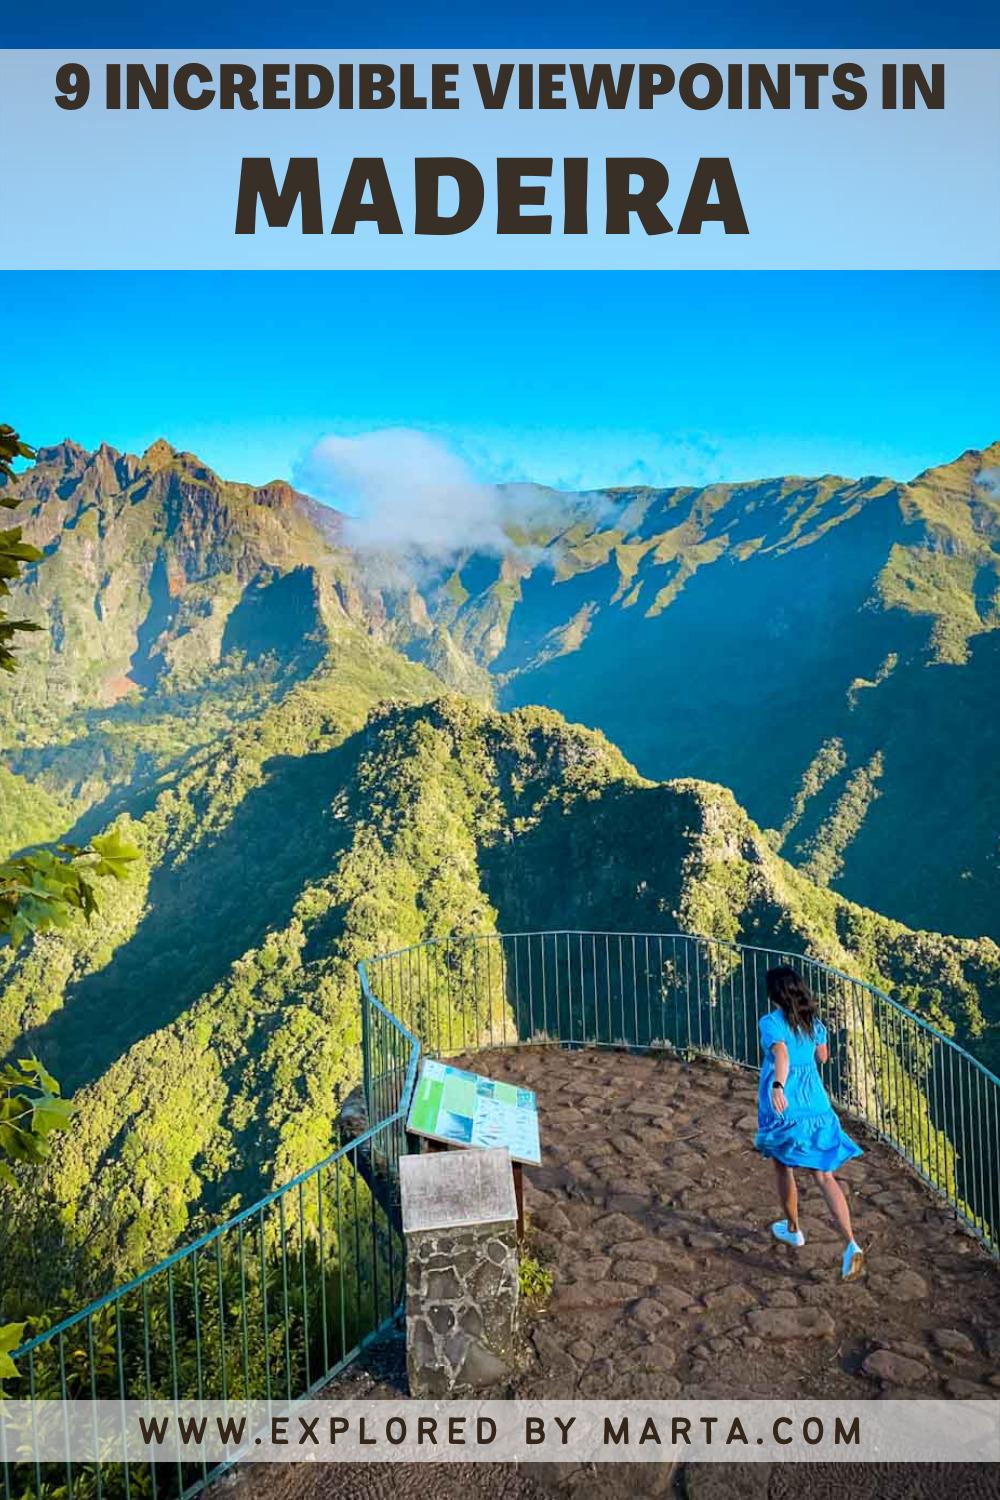 9 incredible viewpoints in Madeira